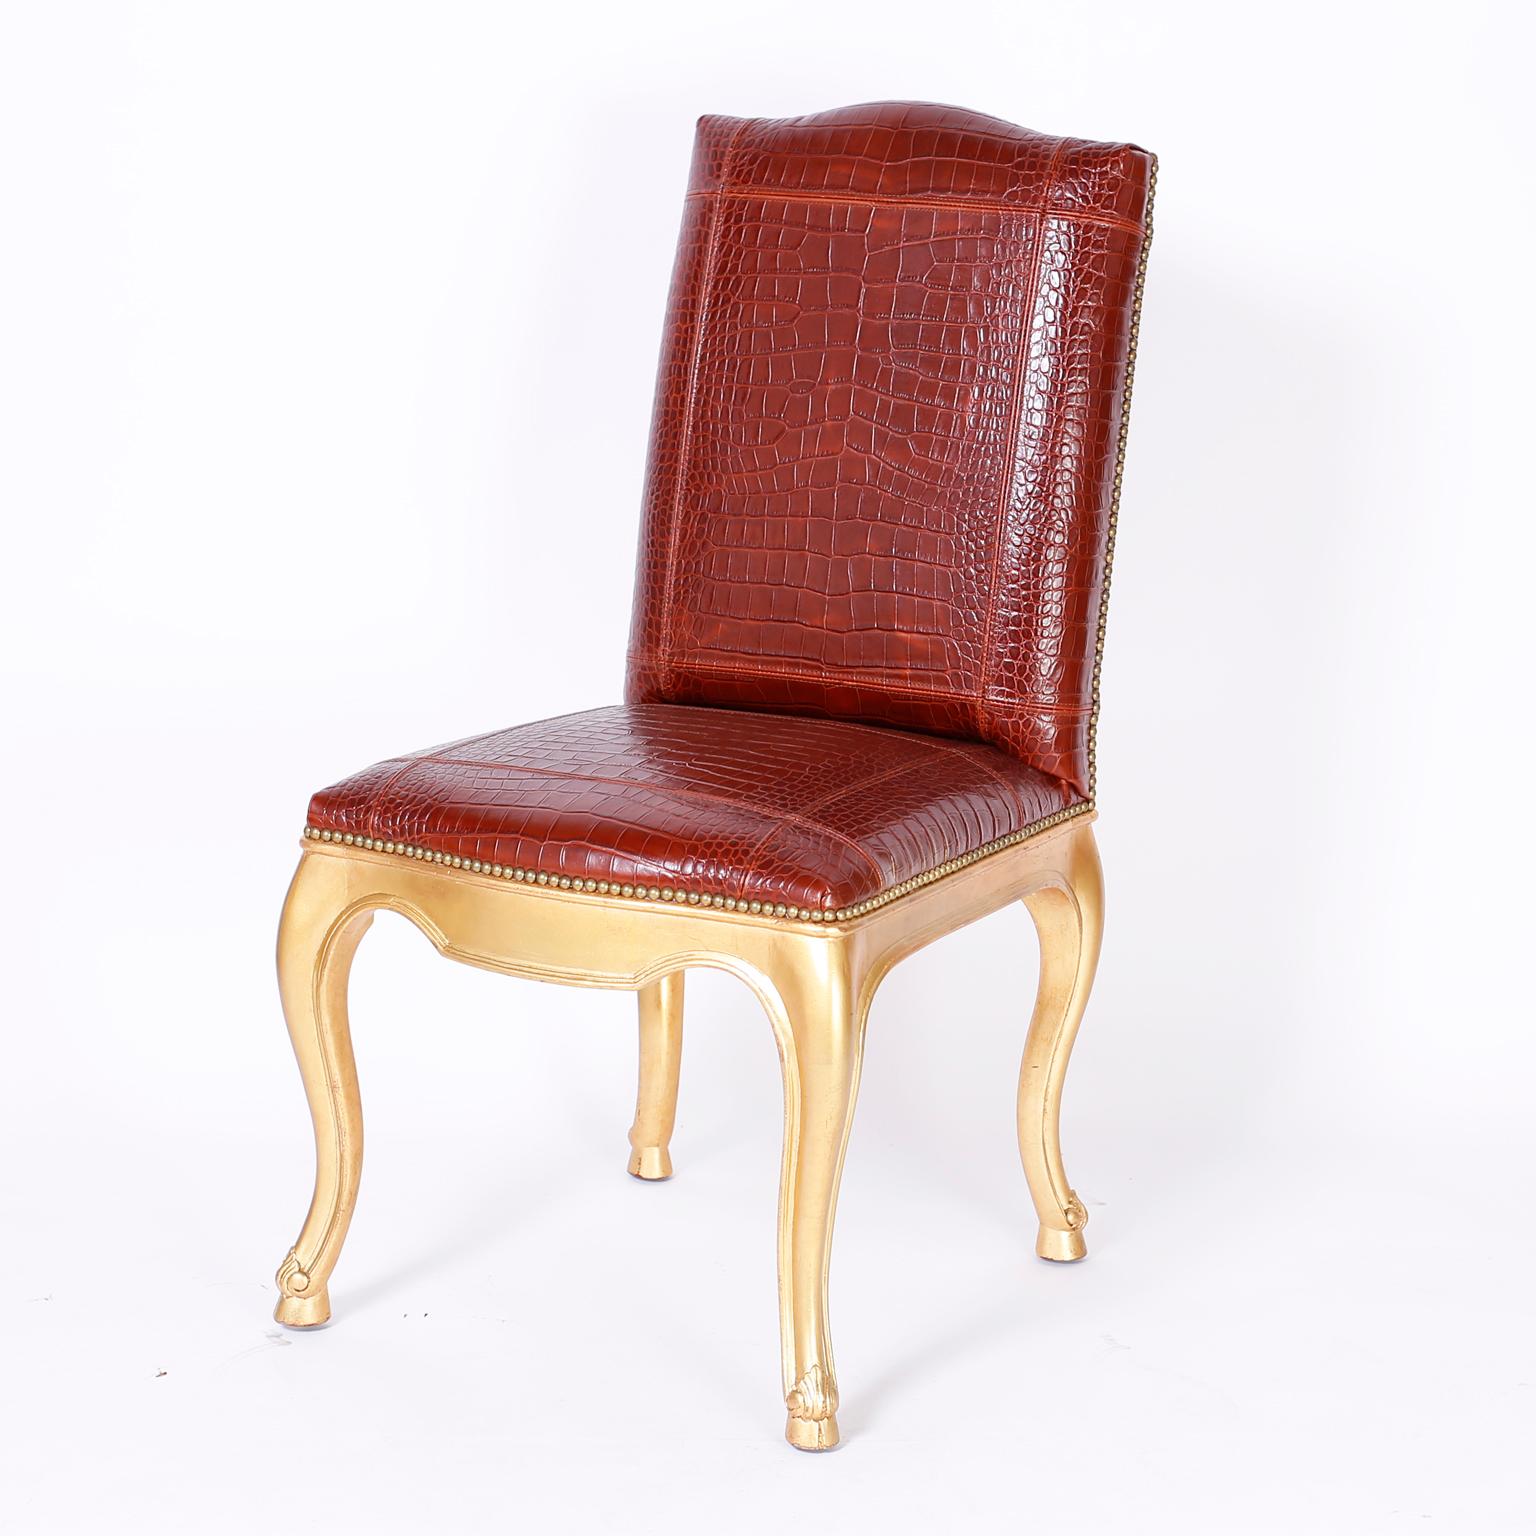 Stand out set of twelve dining chairs with oxblood faux alligator tooled leather upholstery bordered in brass tacks over gold cabriole legs with acanthus leaves and hoof feet. Signed Ralph Lauren.